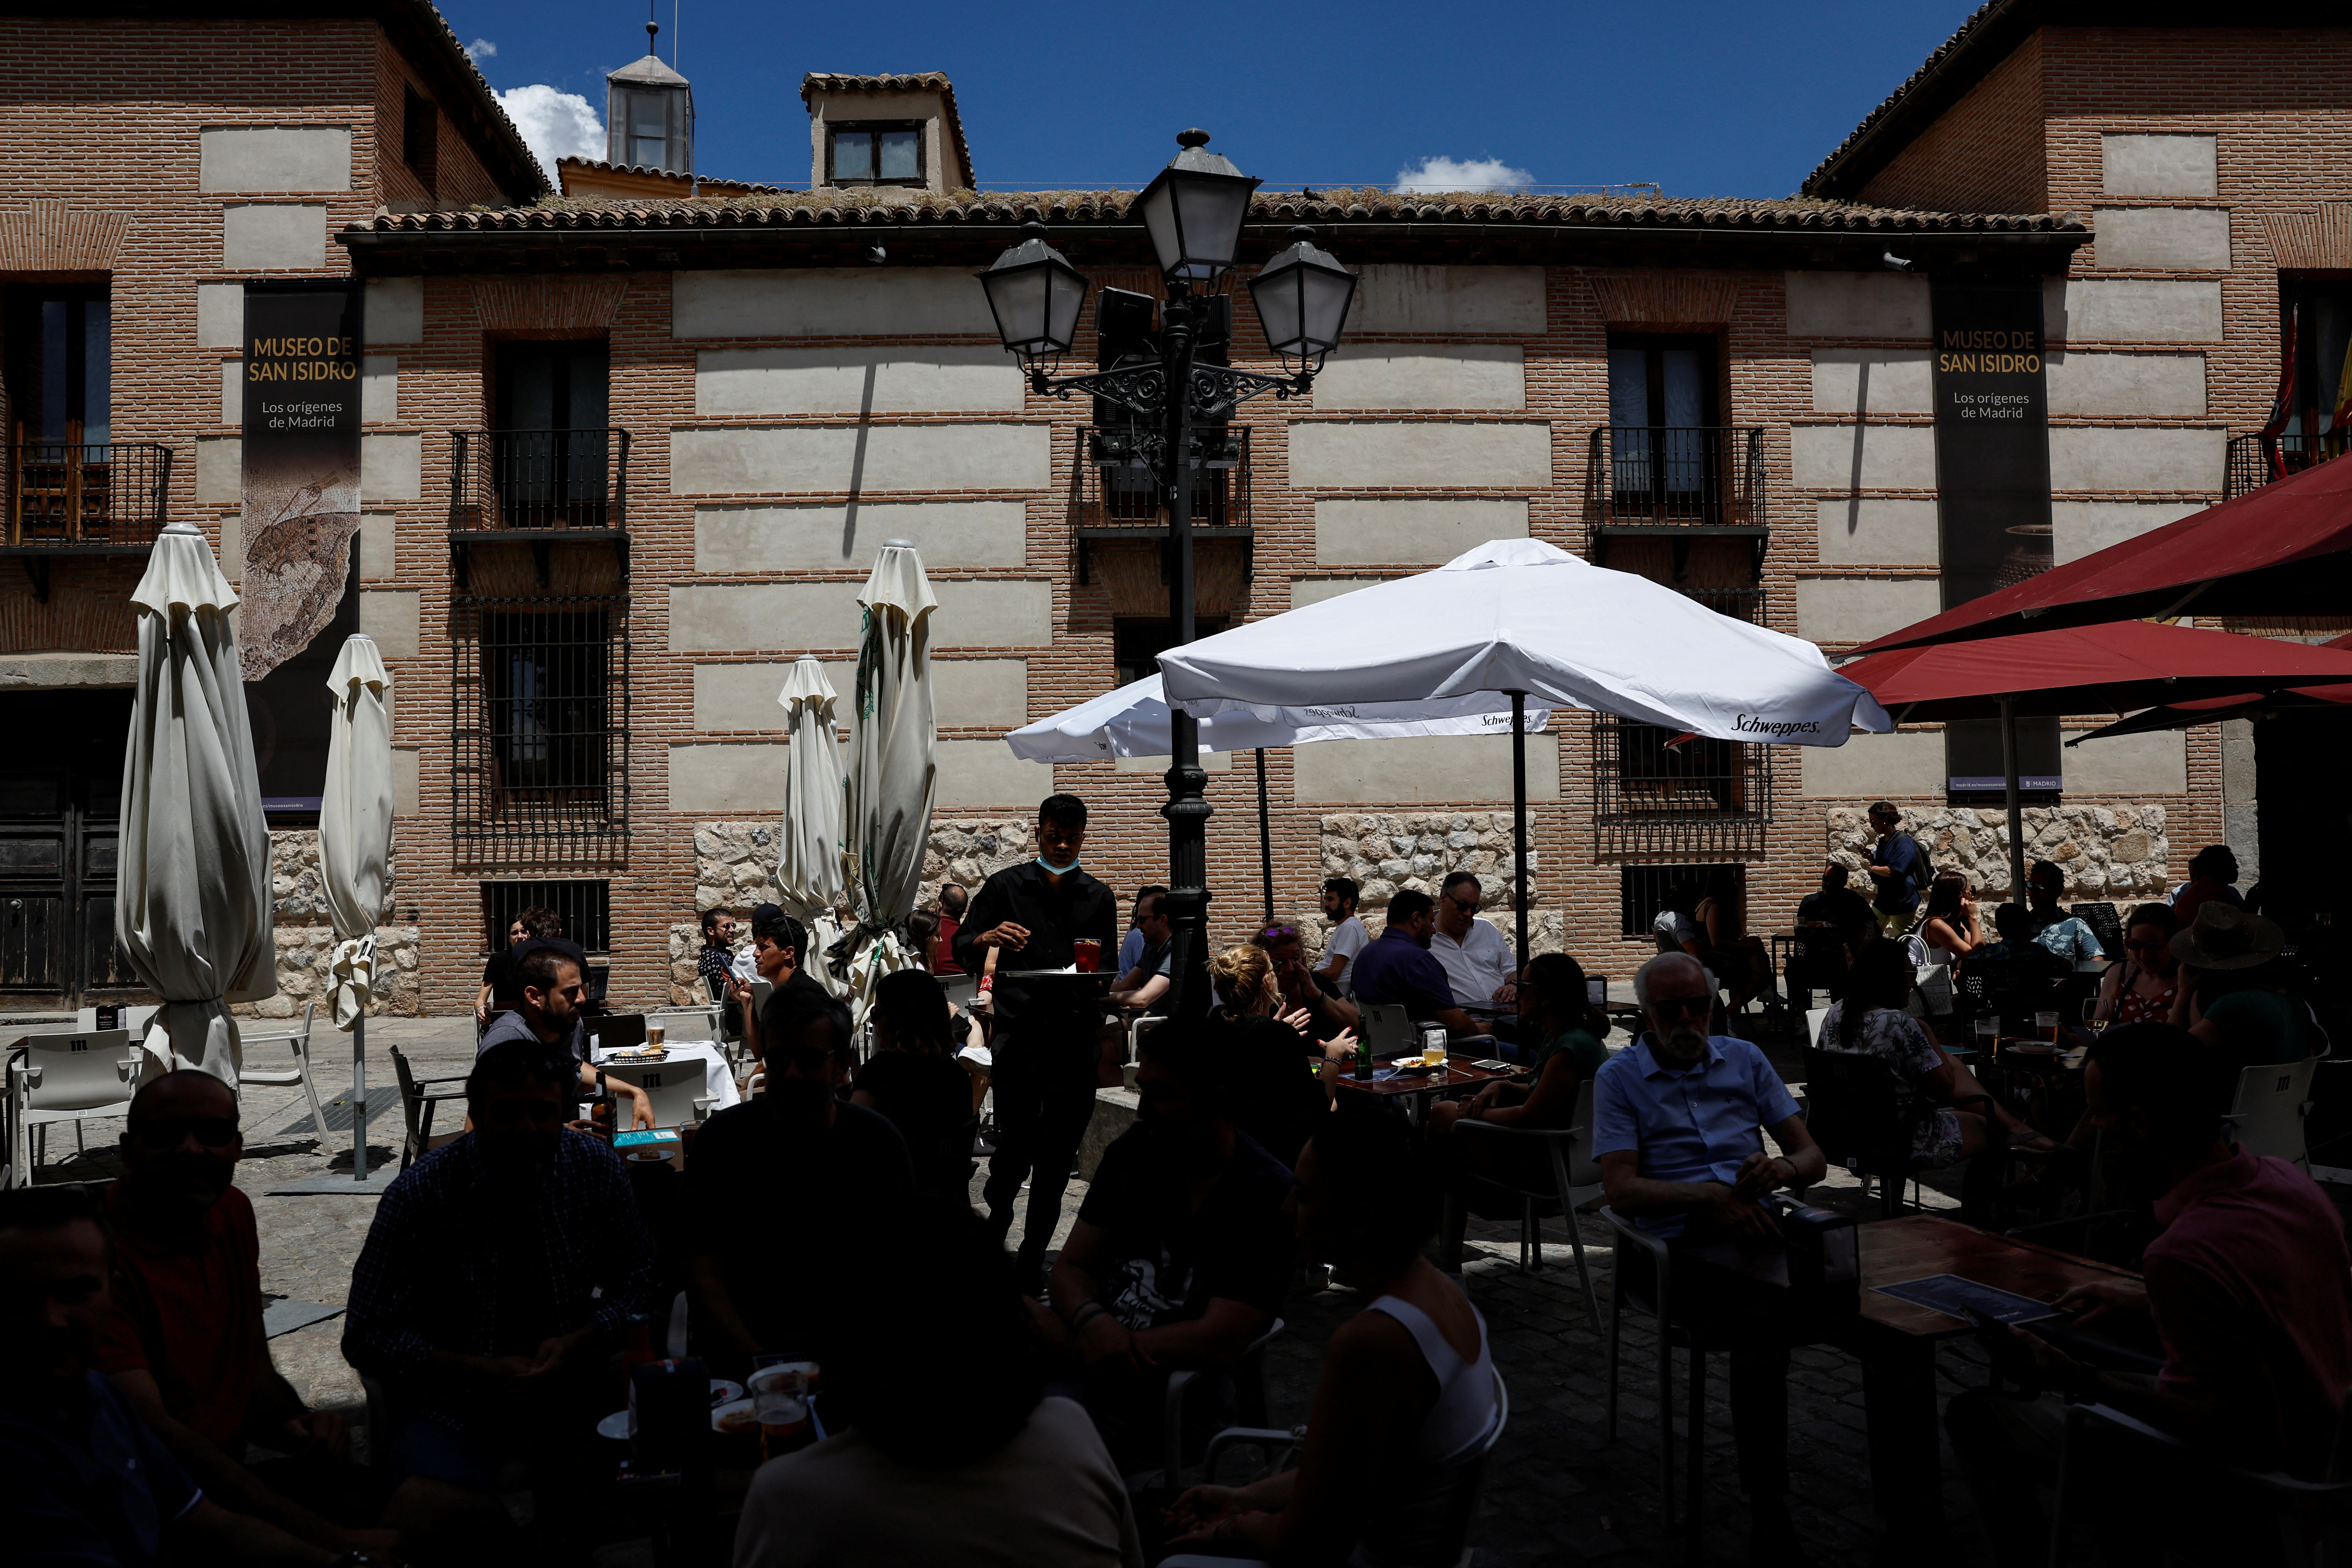 A waiter works at a crowded restaurant terrace in central Madrid